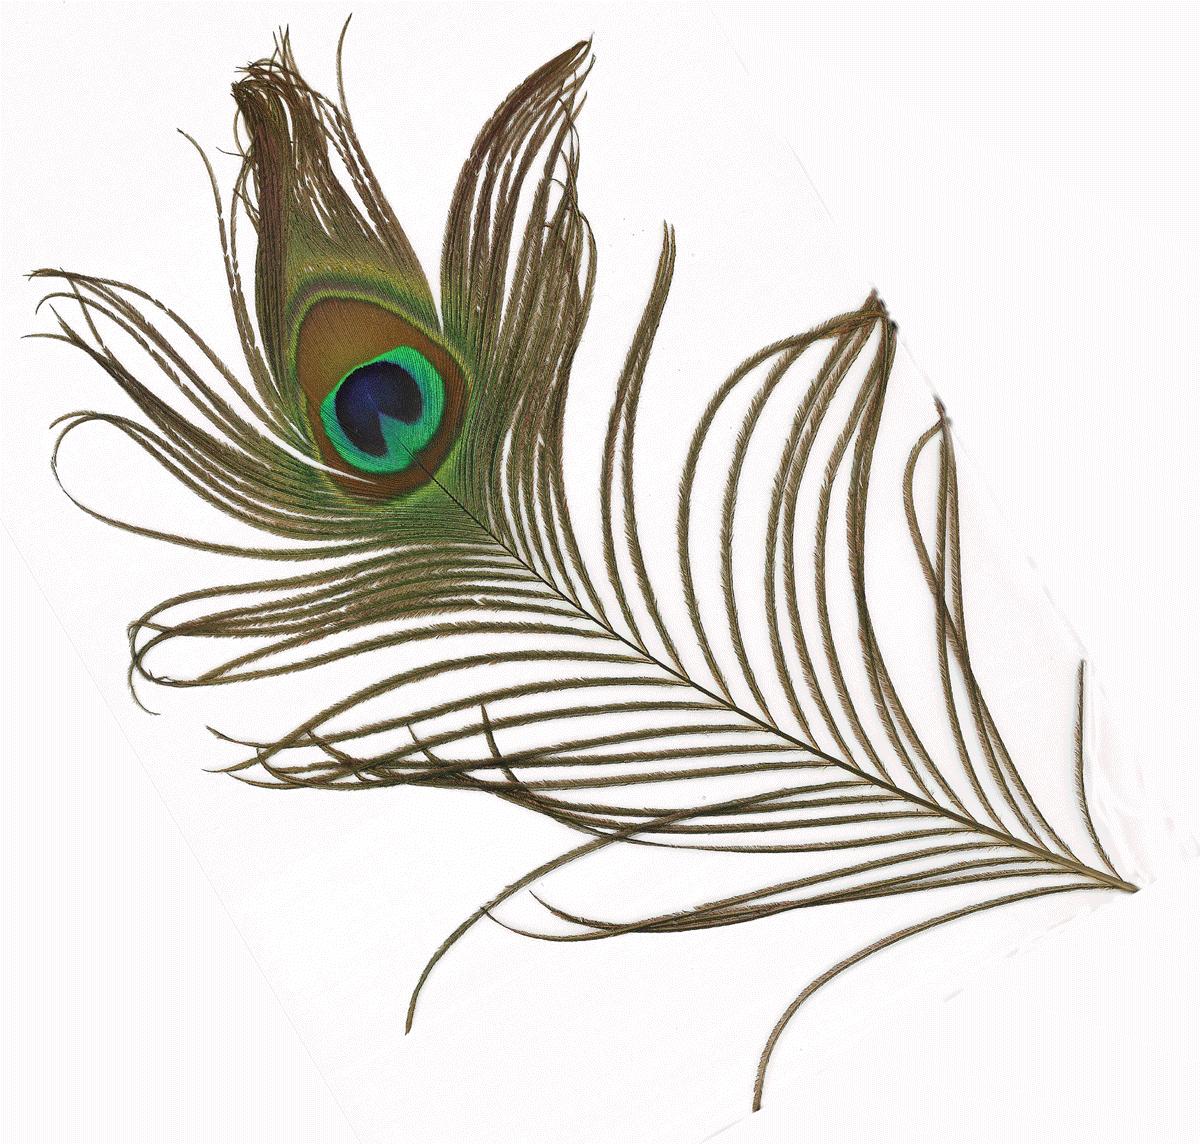 Pix For > Single Peacock Feathers Art